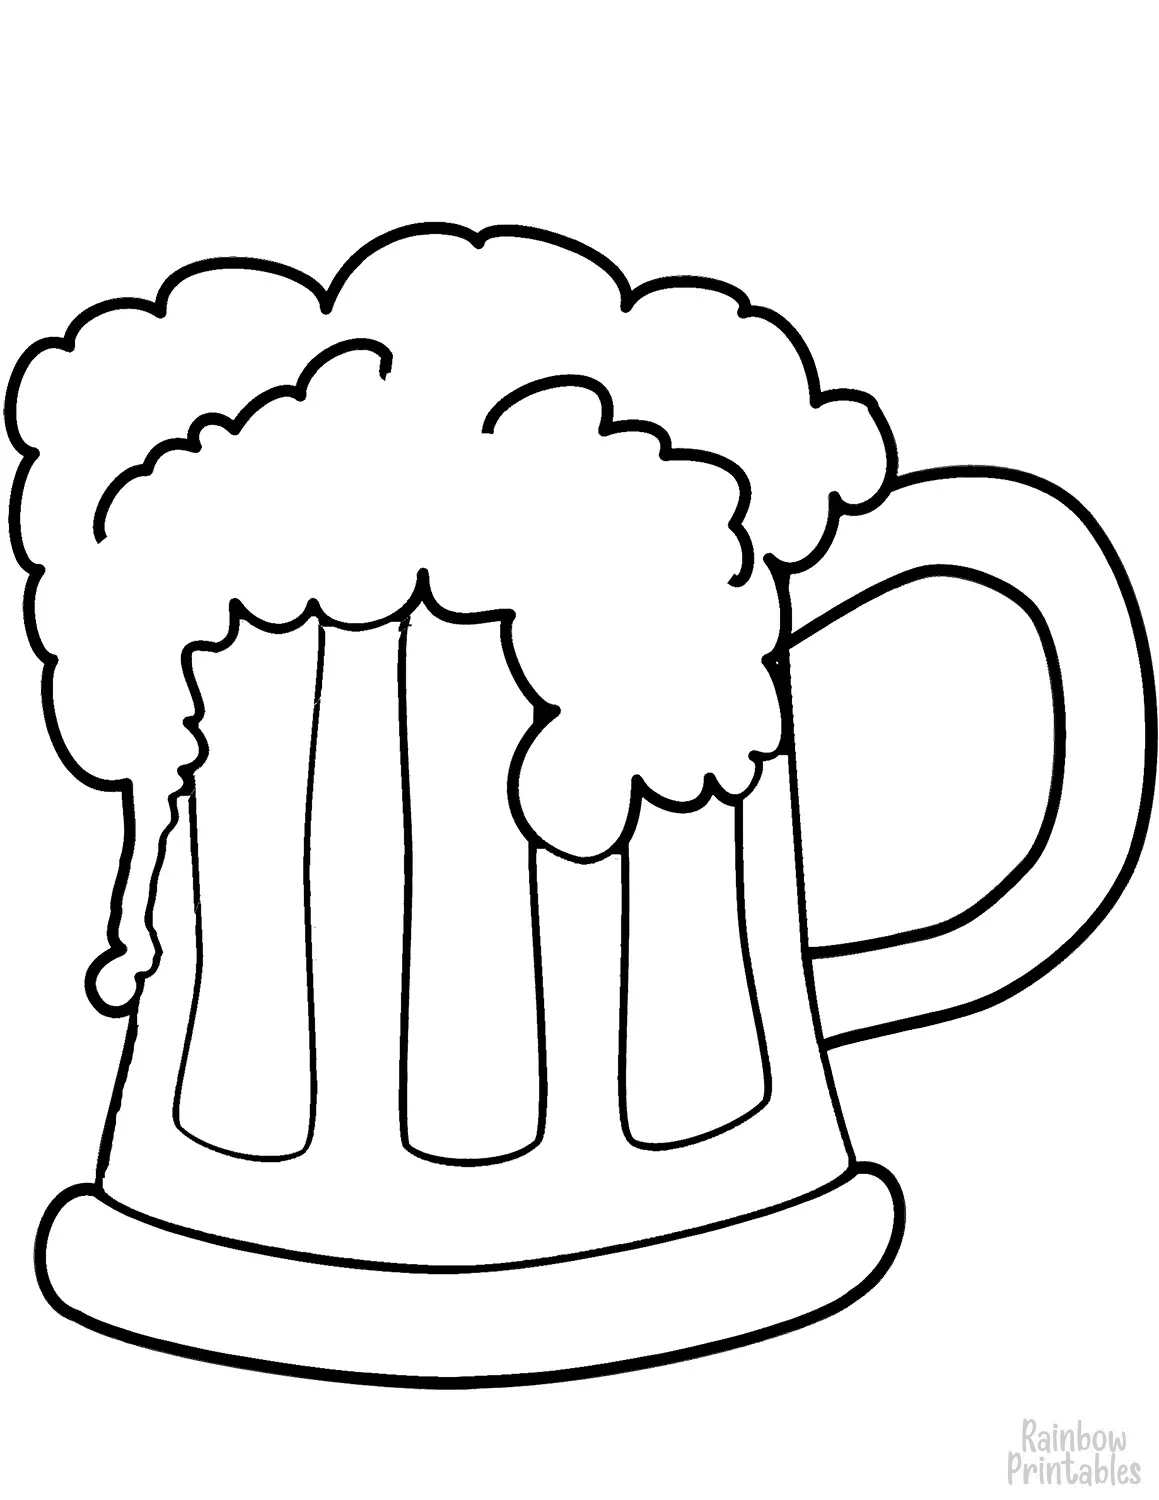 BEER SAINT PATRICKS DAY Clipart Coloring Pages for Kids Adults Art Activities Line Art